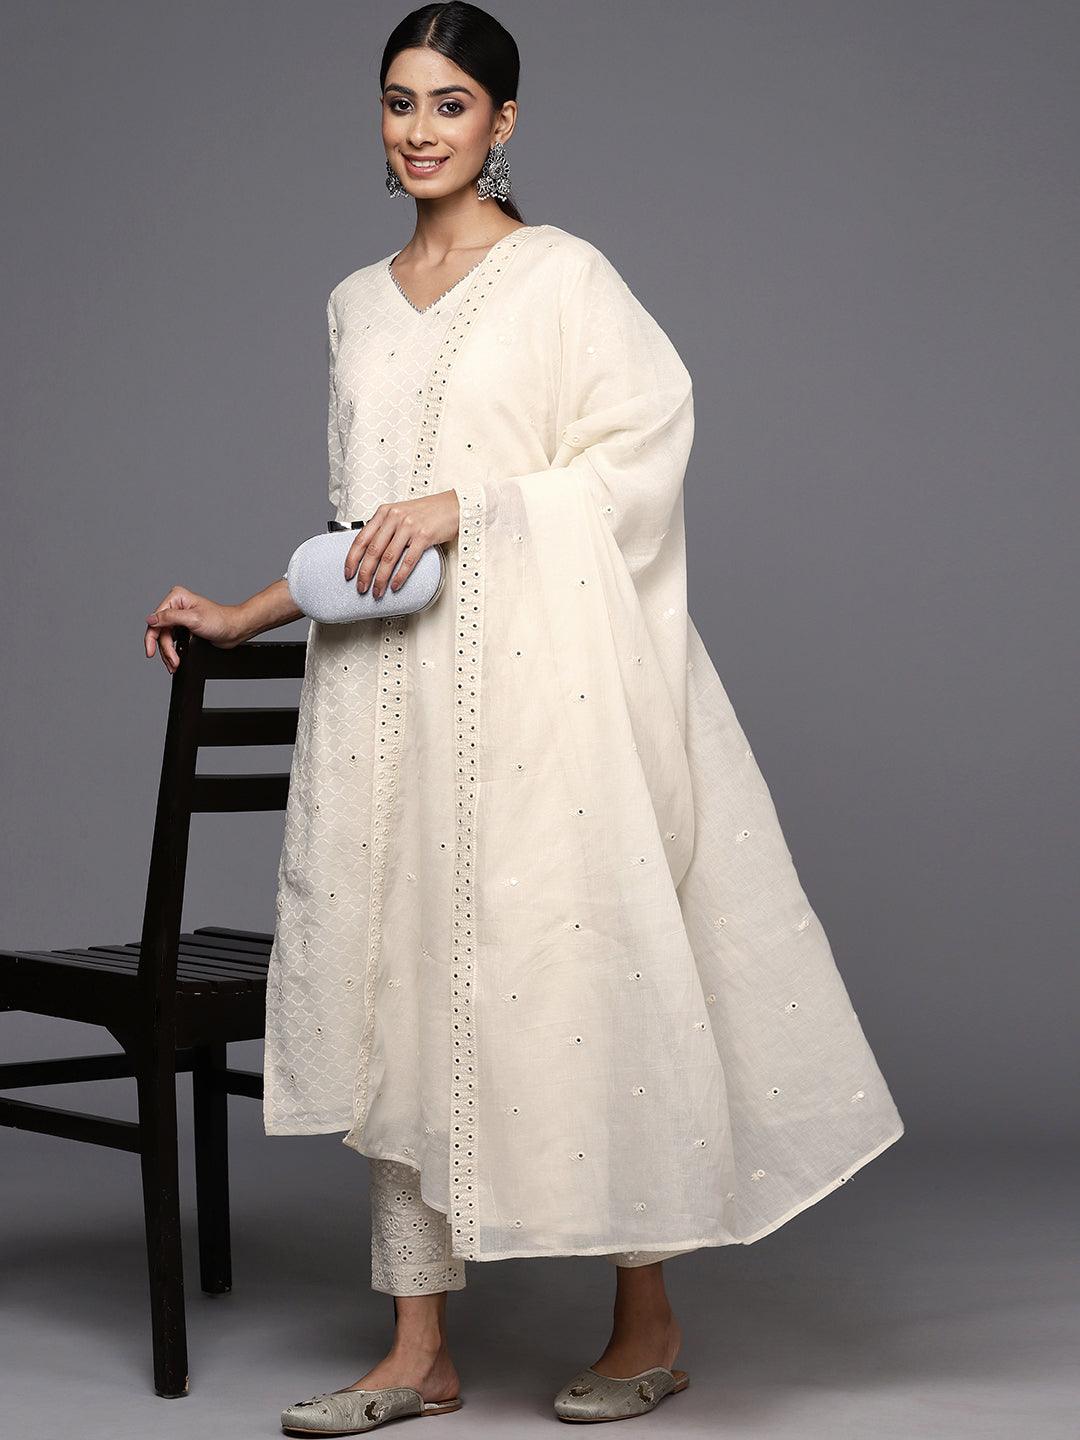 Off White Embroidered Cotton Straight Kurta With Trousers & Dupatta - Libas